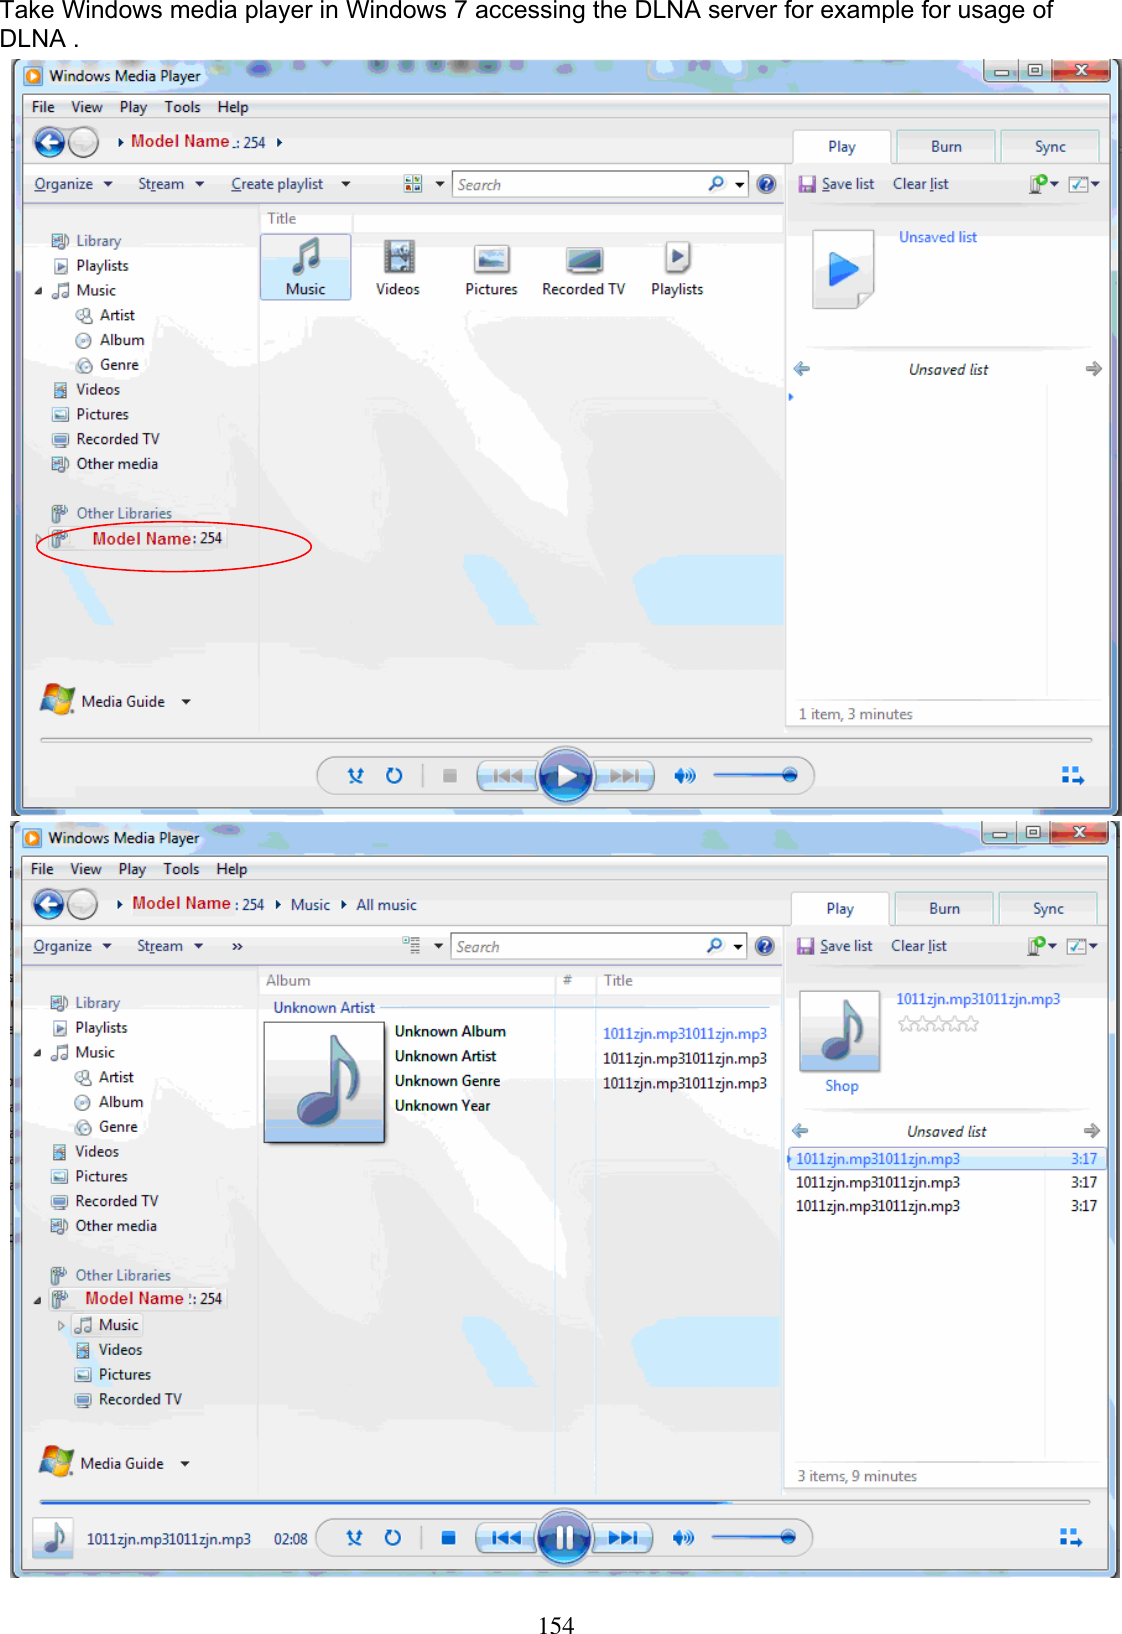 154Take Windows media player in Windows 7 accessing the DLNA server for example for usage of DLNA .